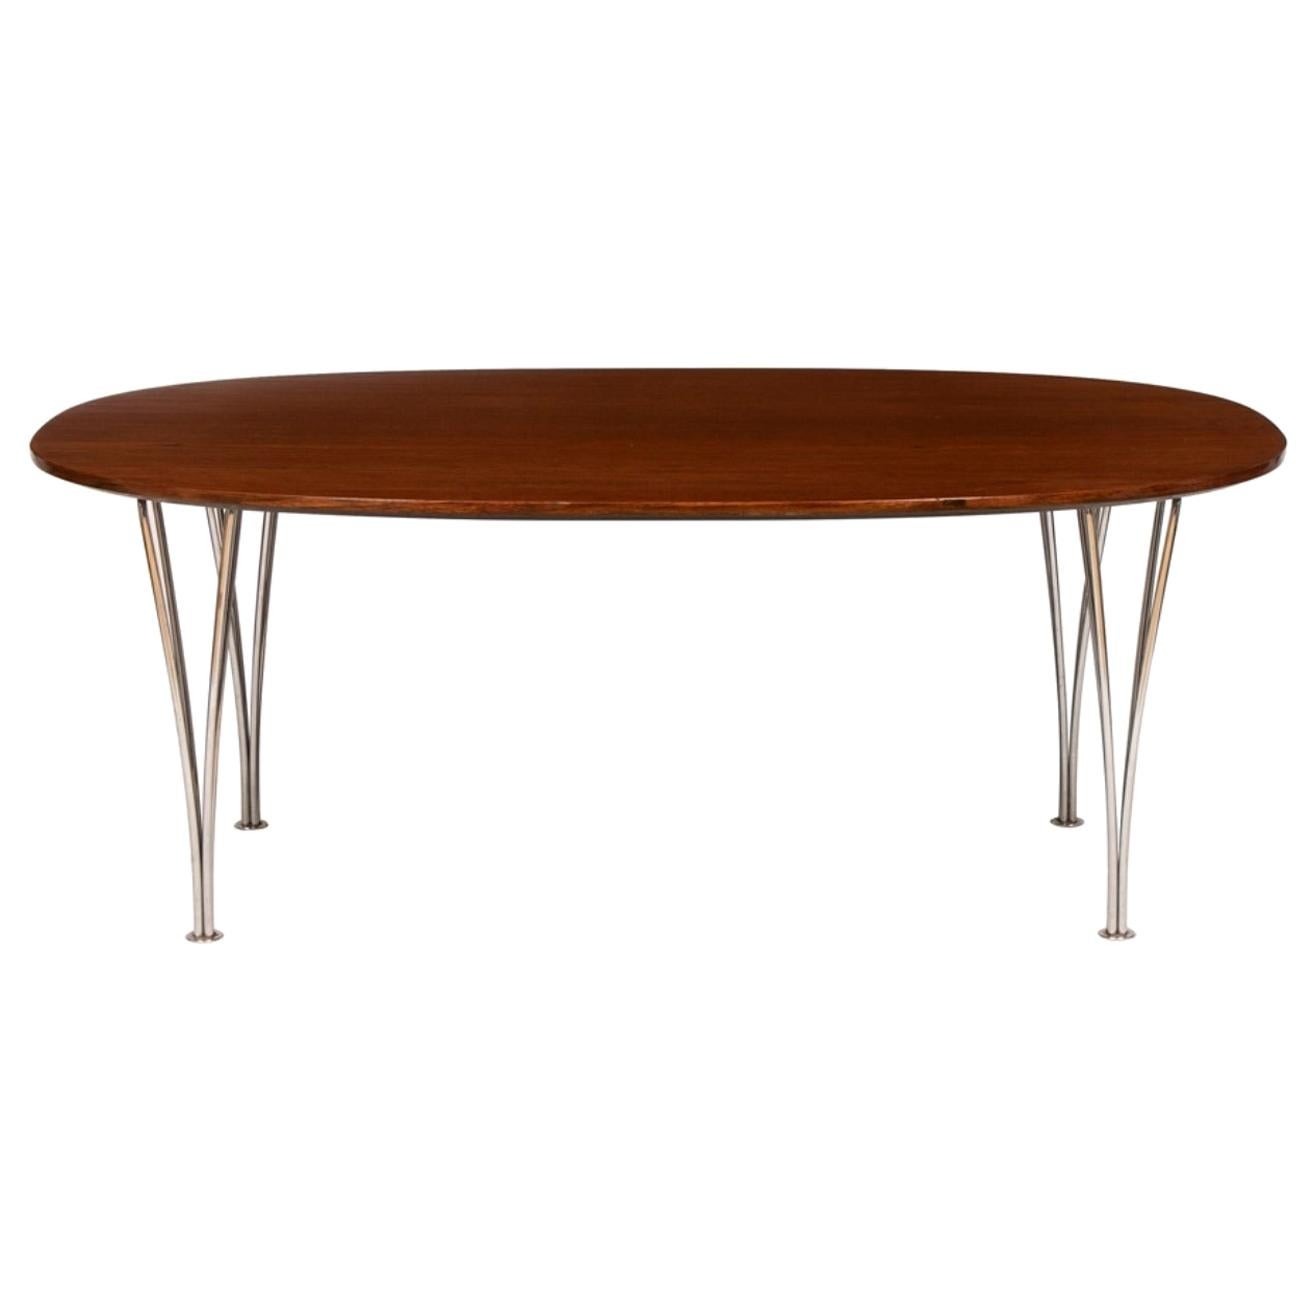 Super Elliptical Fritz Hansen Rosewood Coffee Table For Sale